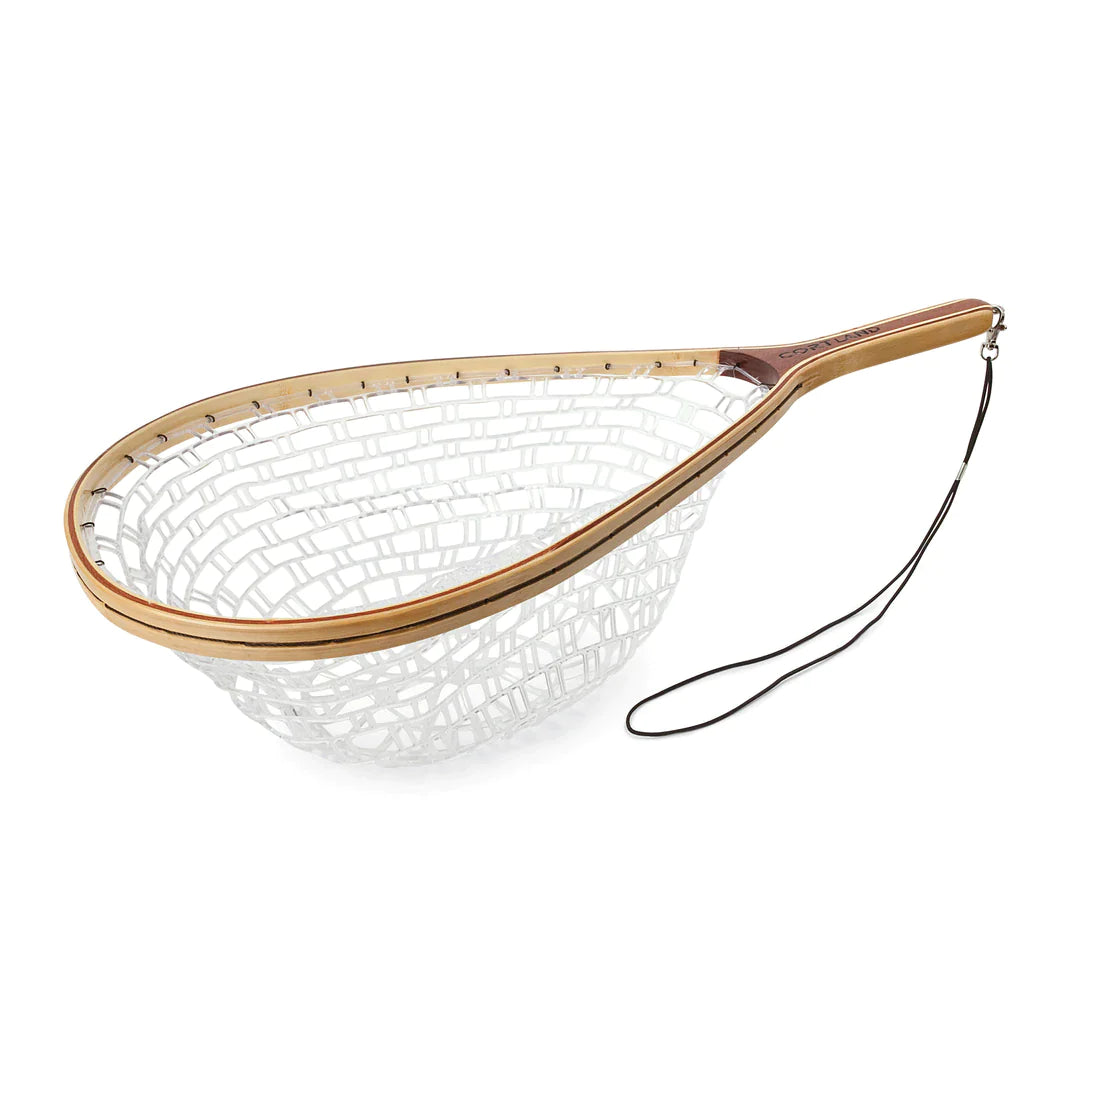 Cortland Bamboo Clear Mesh Catch & Release Net - Upavon Fly Fishing